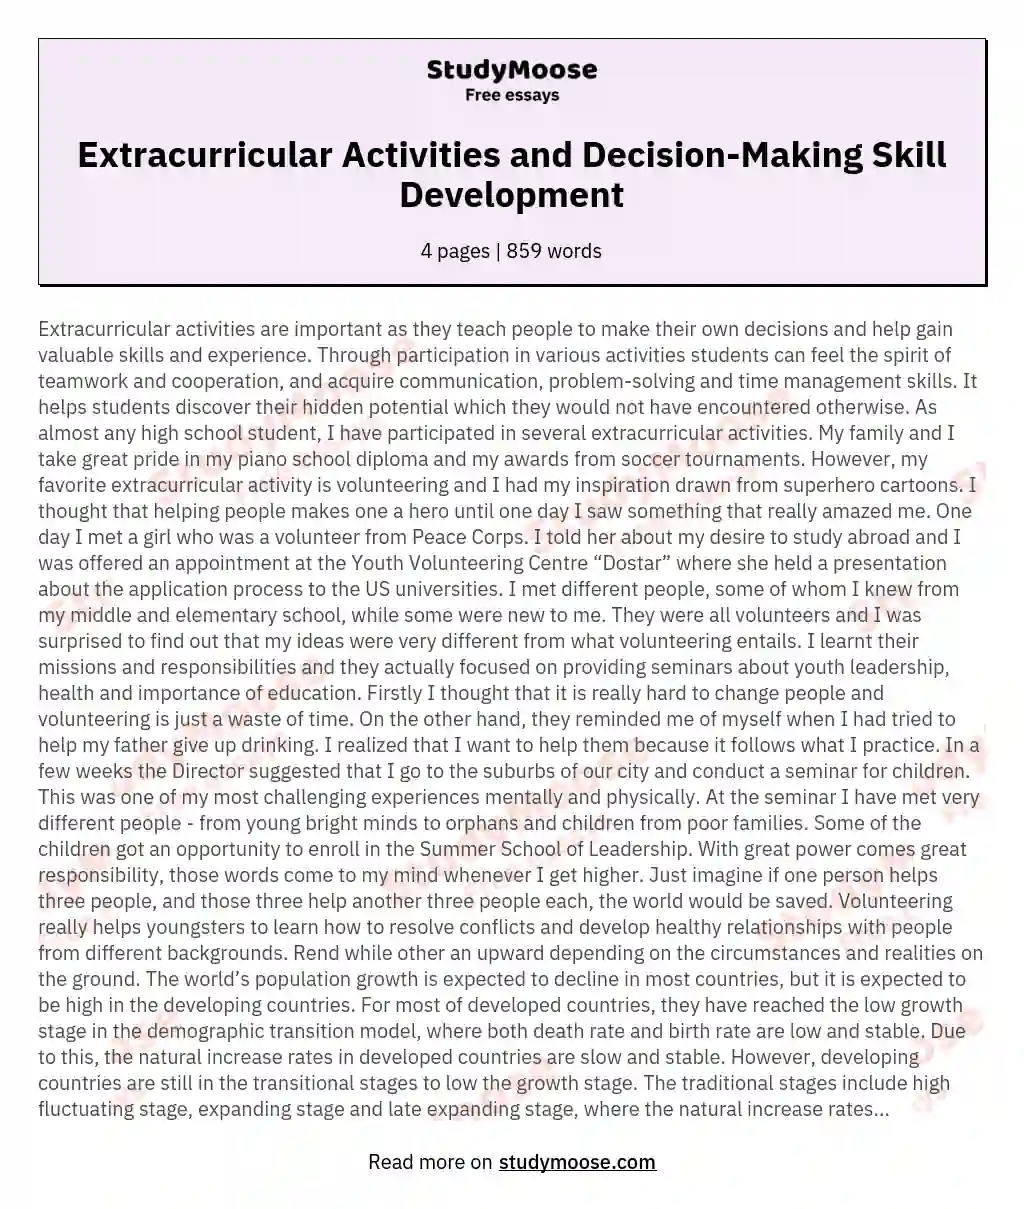 Extracurricular Activities and Decision-Making Skill Development essay